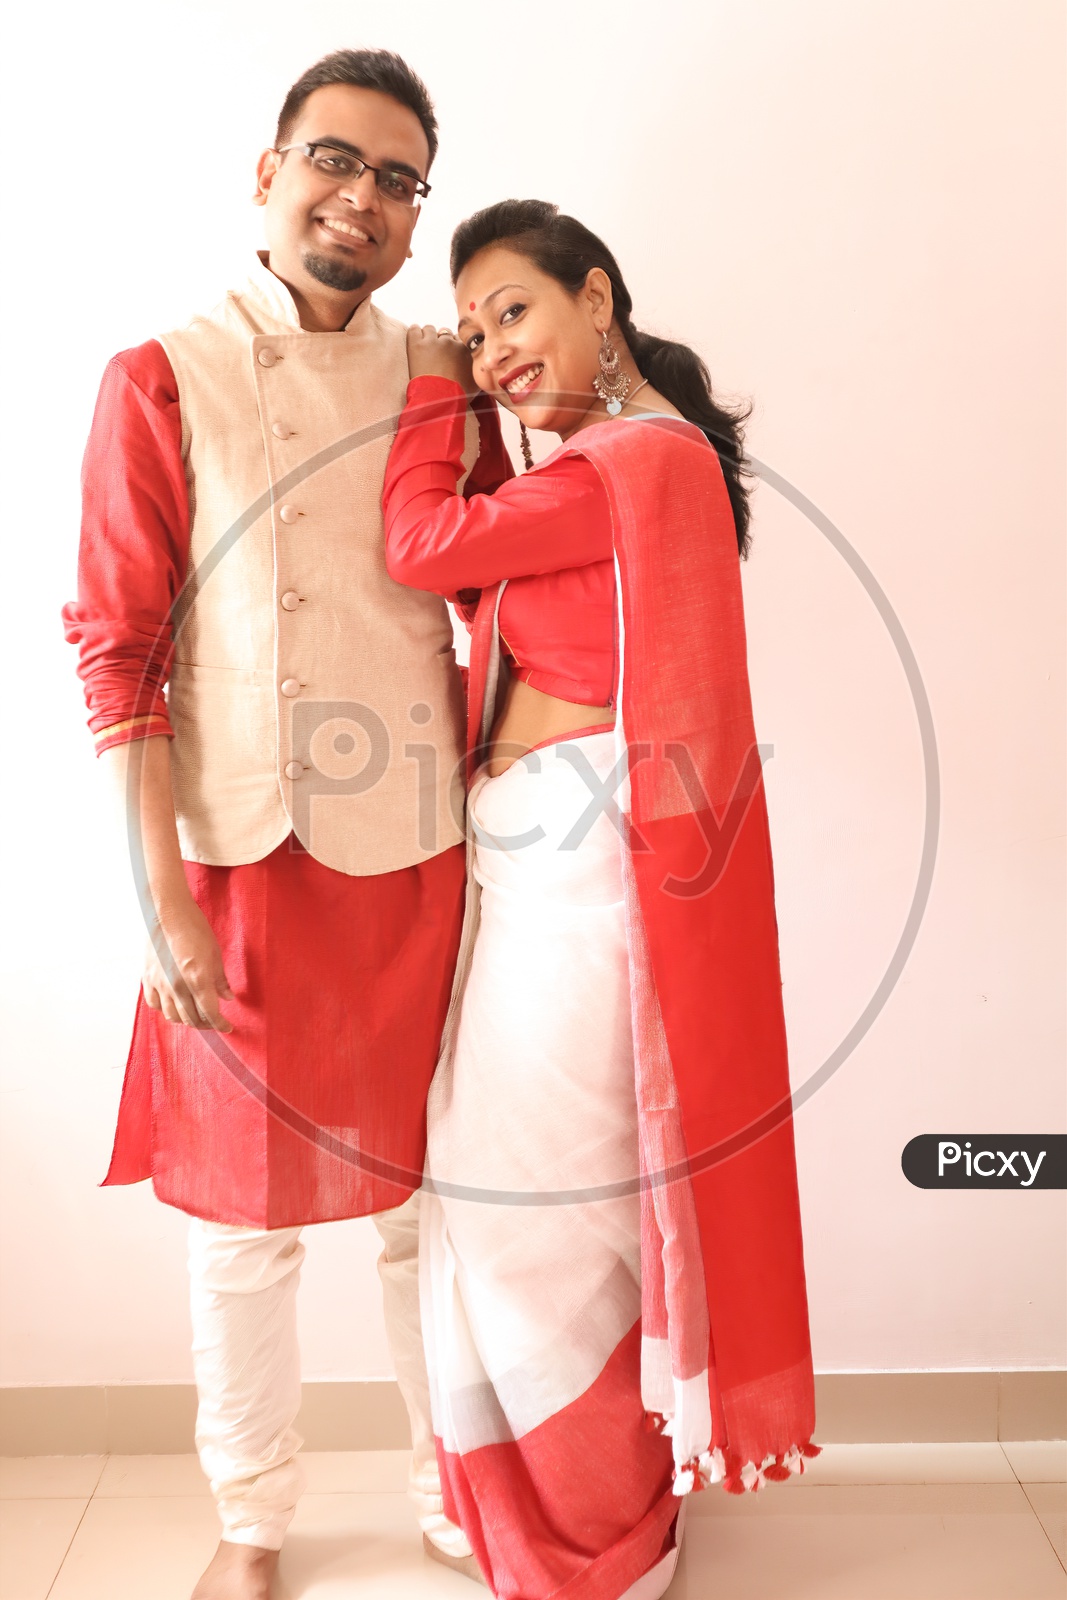 A Young Indian Bengali Assamese Married Romantic Couple Dressed In Red And White Ethnic Indian Dress, Looking At The Camera And Smiling